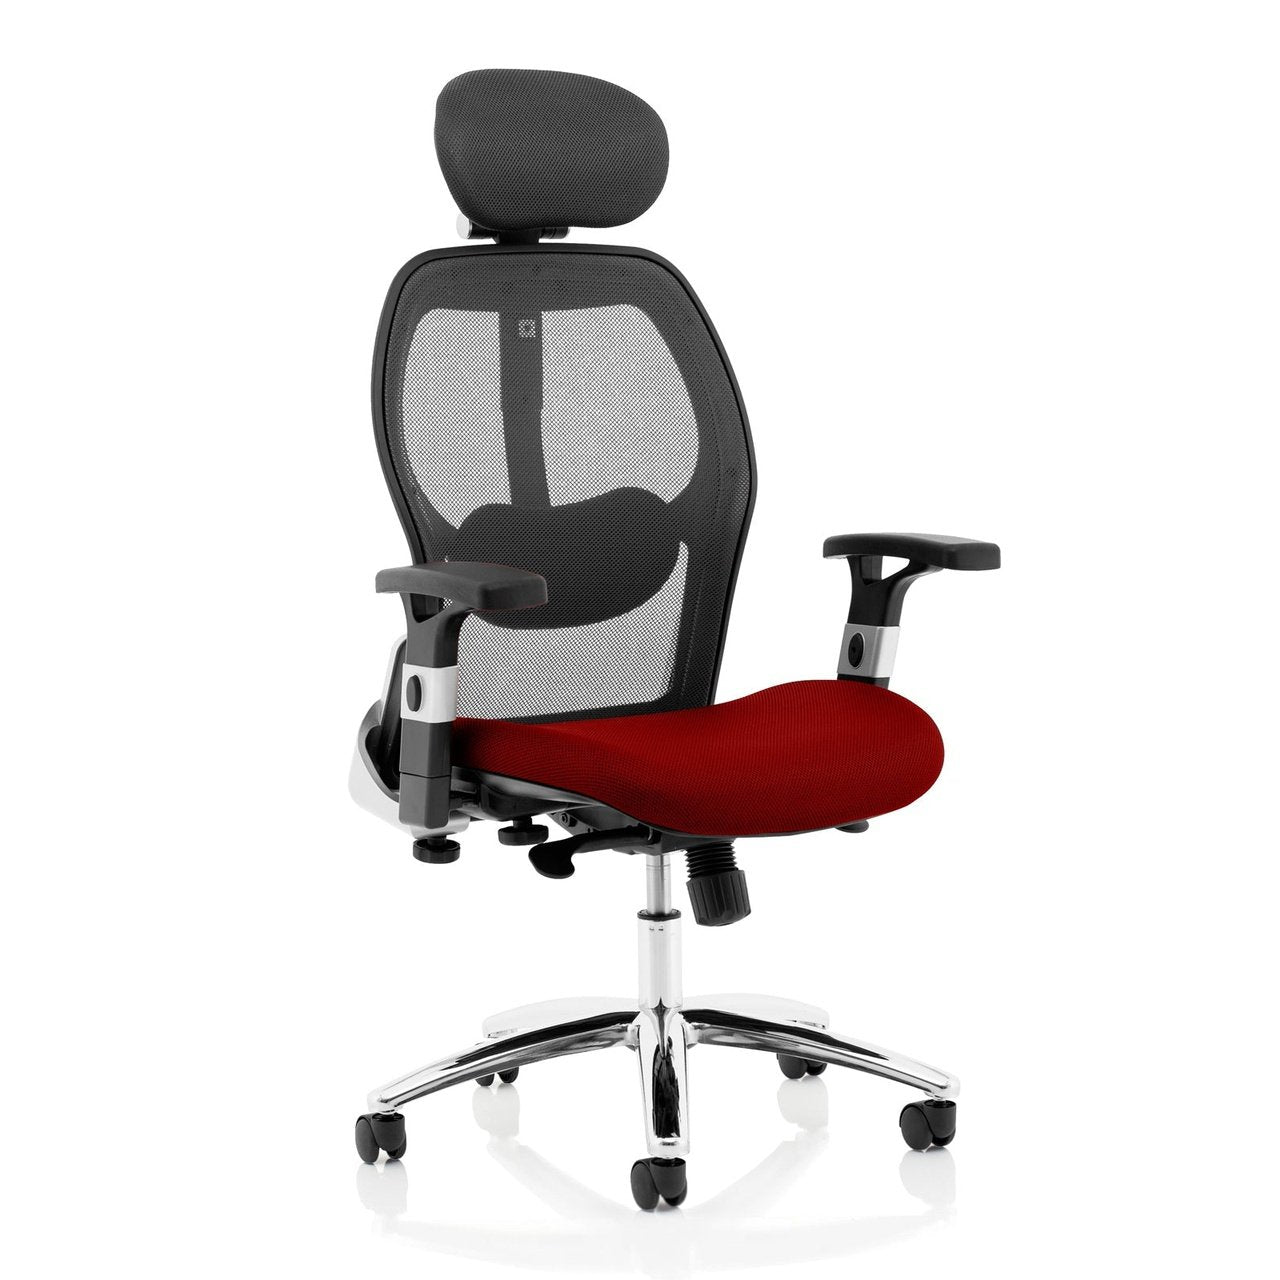 Sanderson II High Mesh Back Executive Office Chair - Airmesh Seat, Chrome Frame, Adjustable Arms & Lumbar Support, 125kg Capacity, 8hr Usage